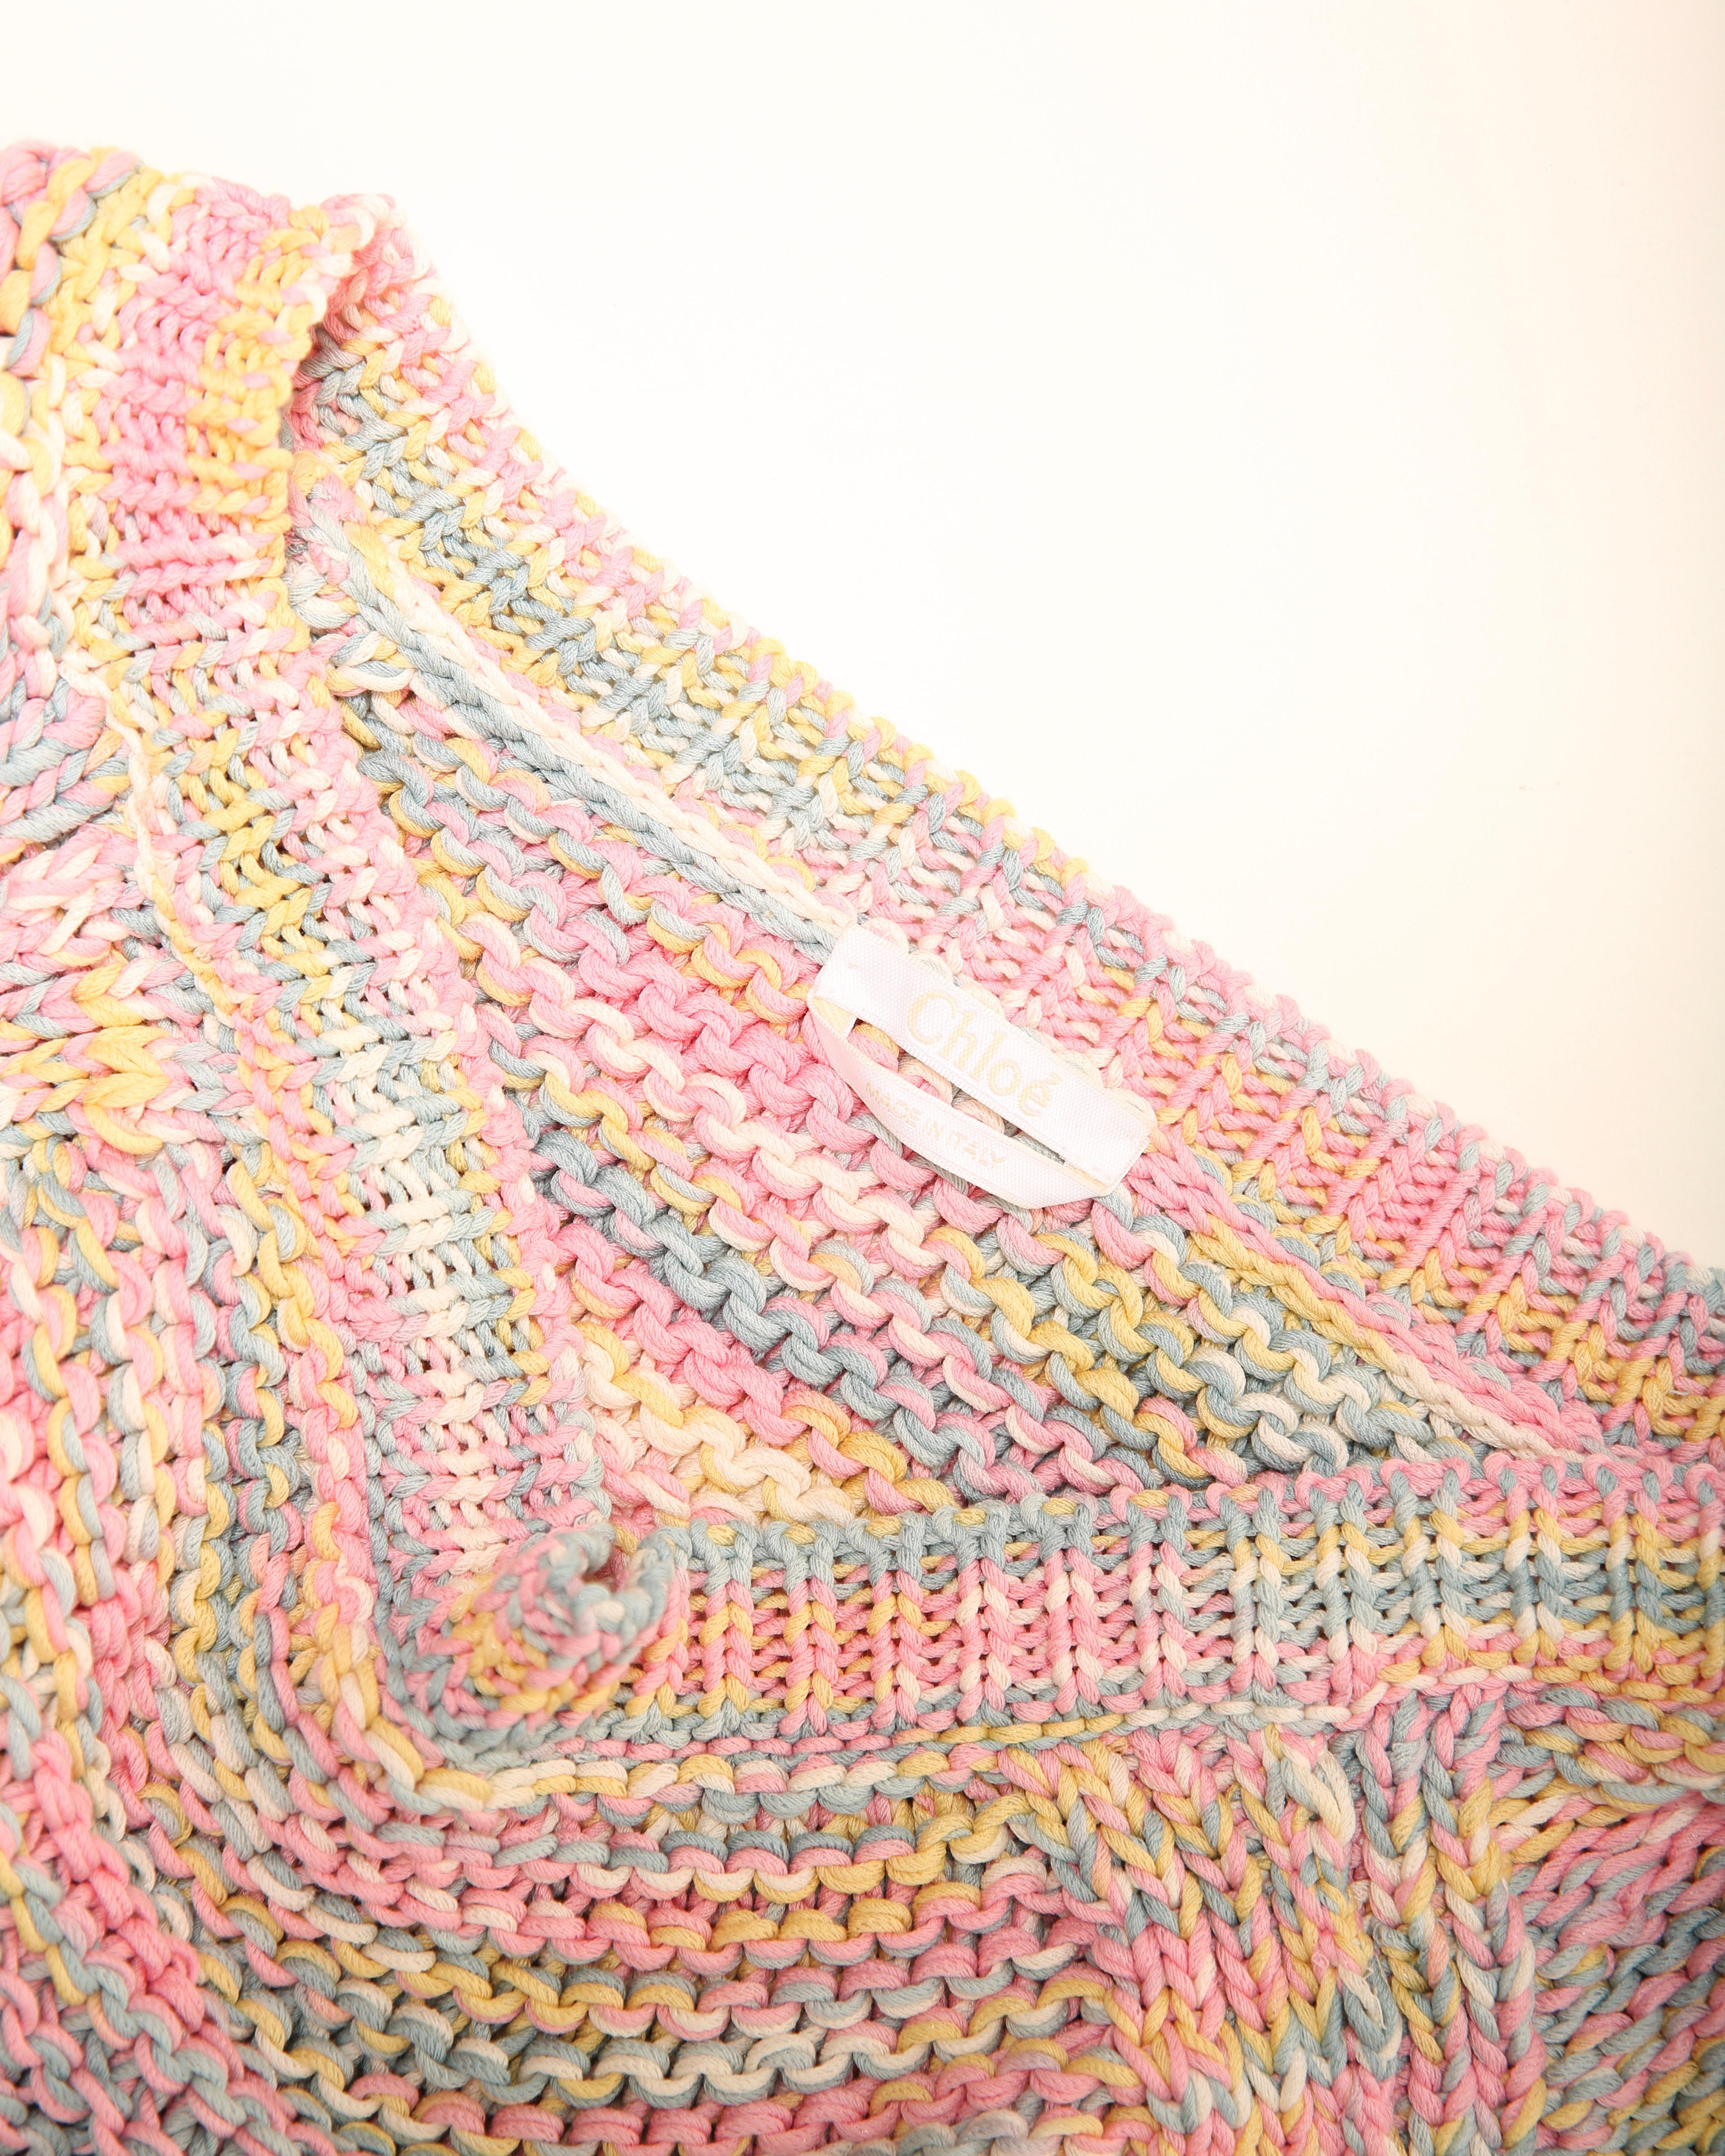 Chloe S/S 2016 oversized chunky knit knitted pink pastel rainbow slouch sweater For Sale 3